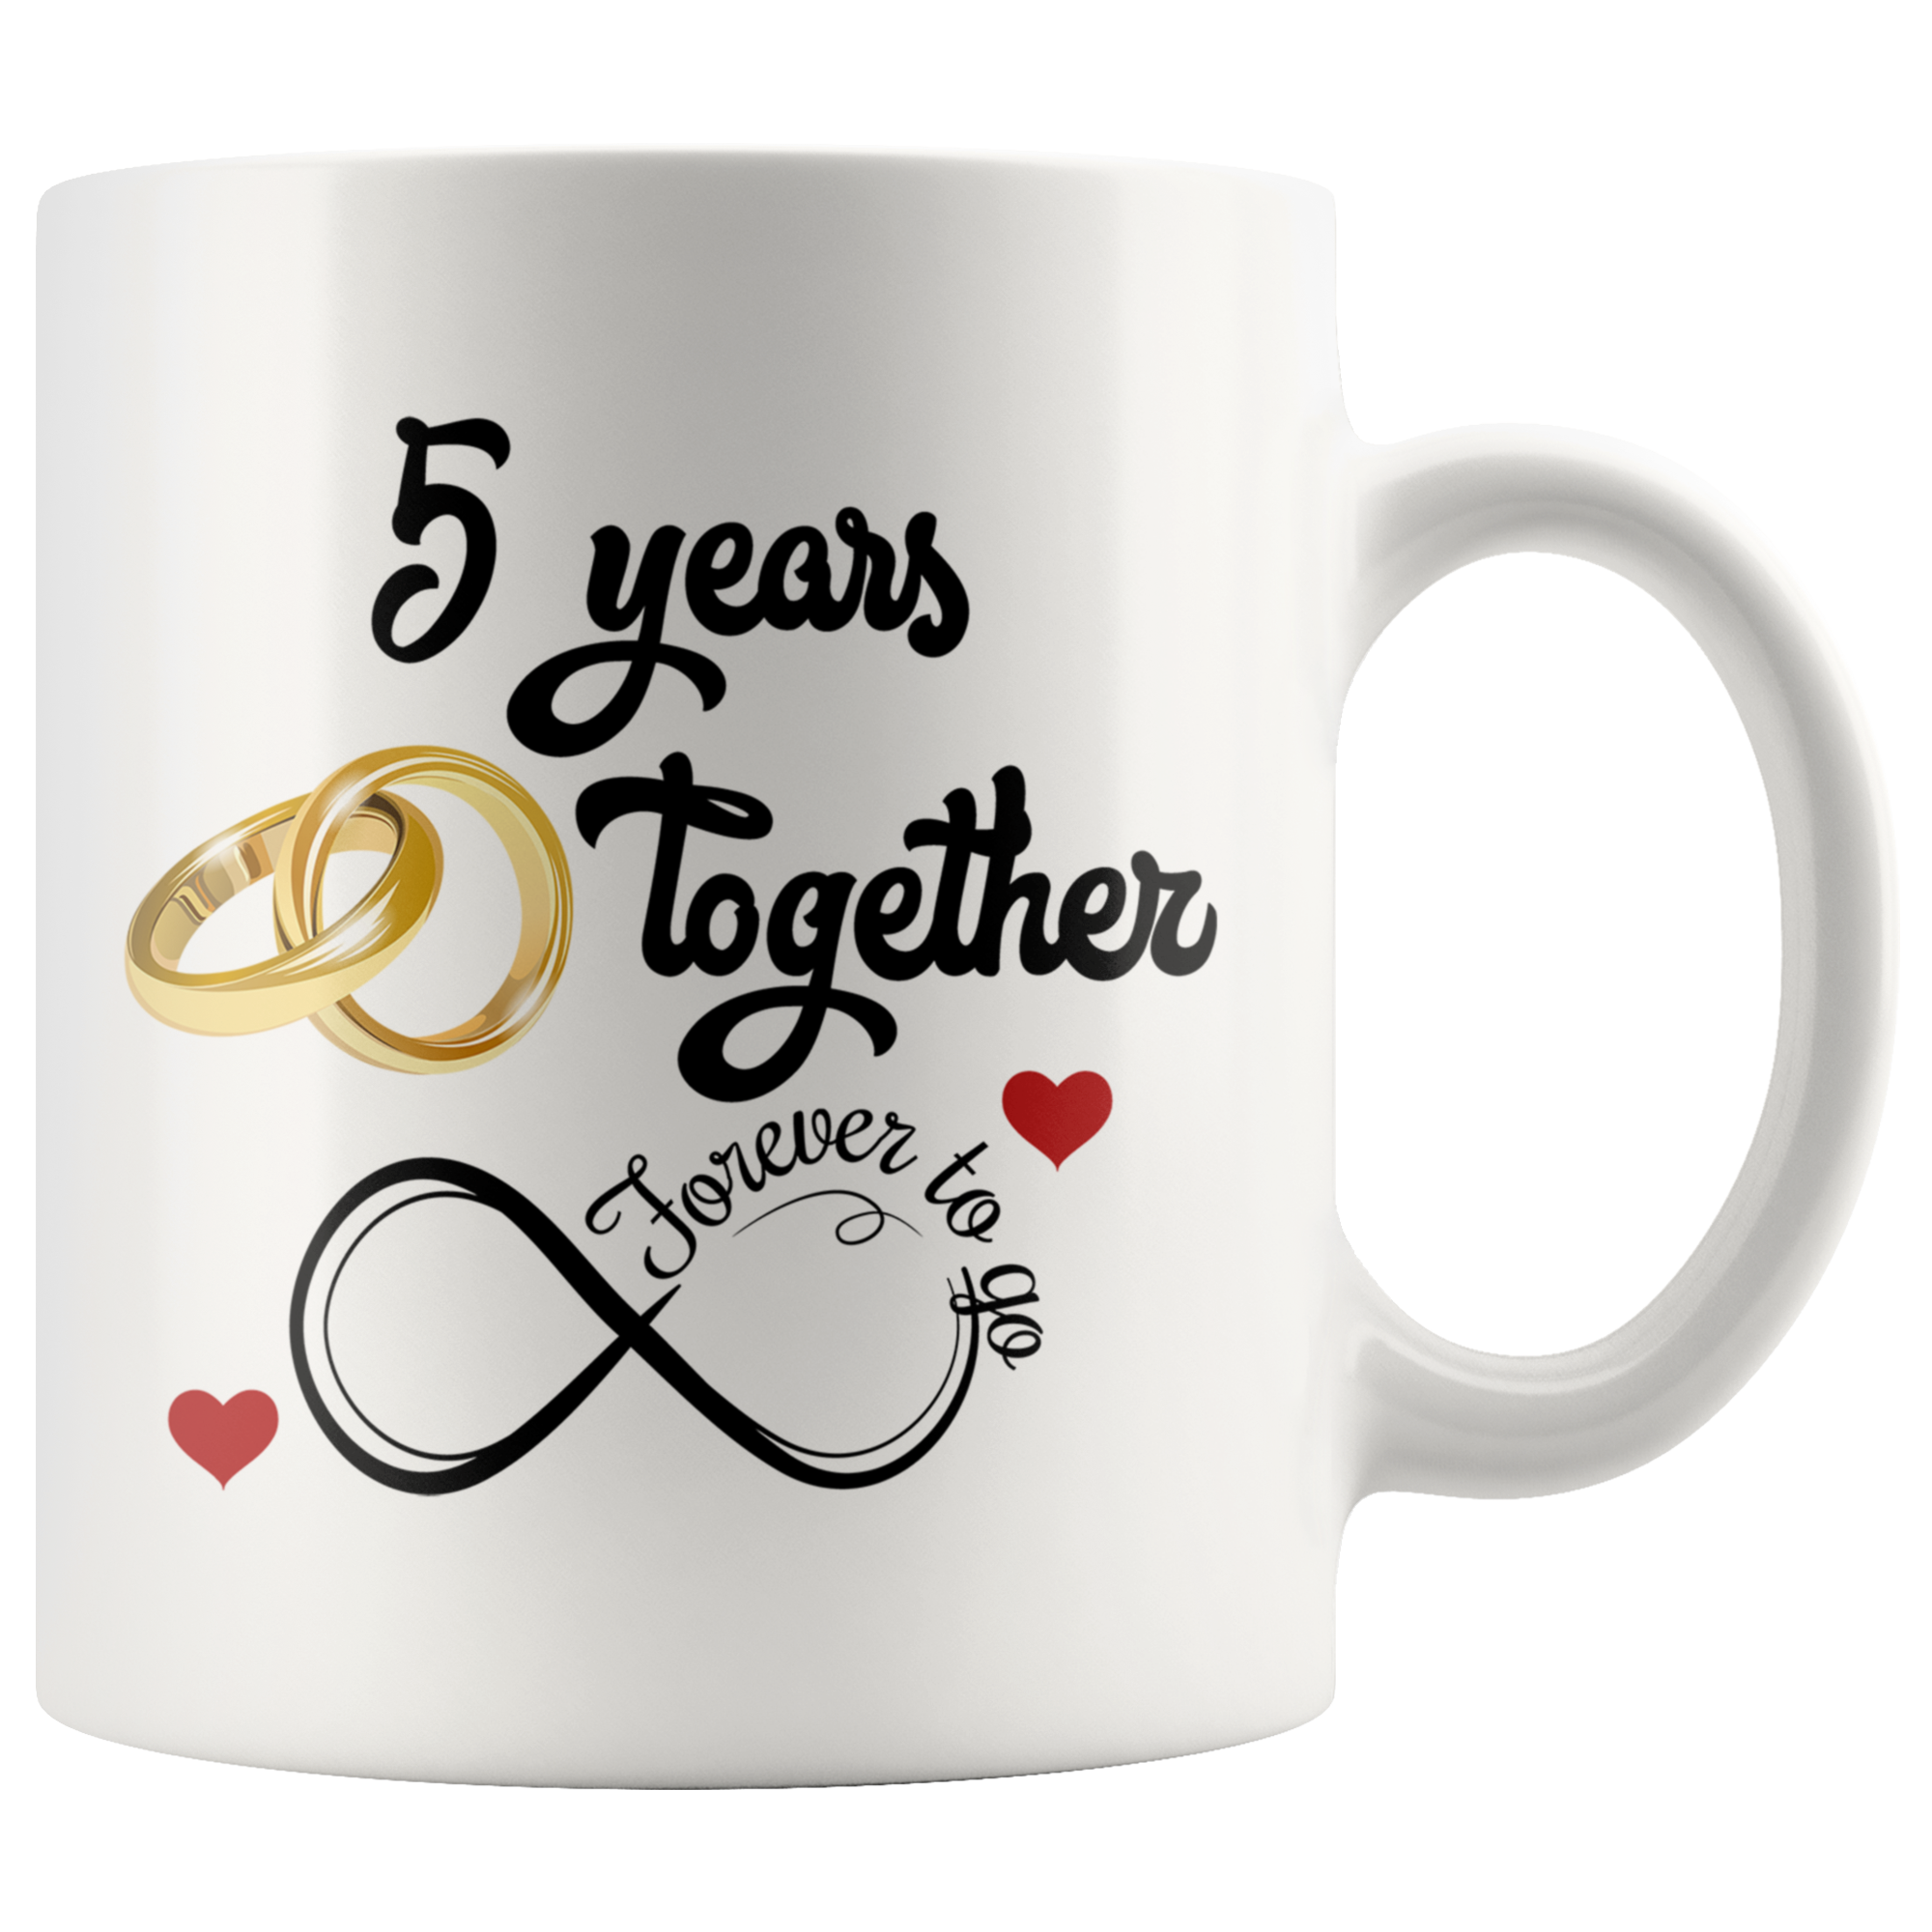 Anniversary Gift He Will Love | Diy gifts for him, Bday gifts for him,  Romantic gifts for him